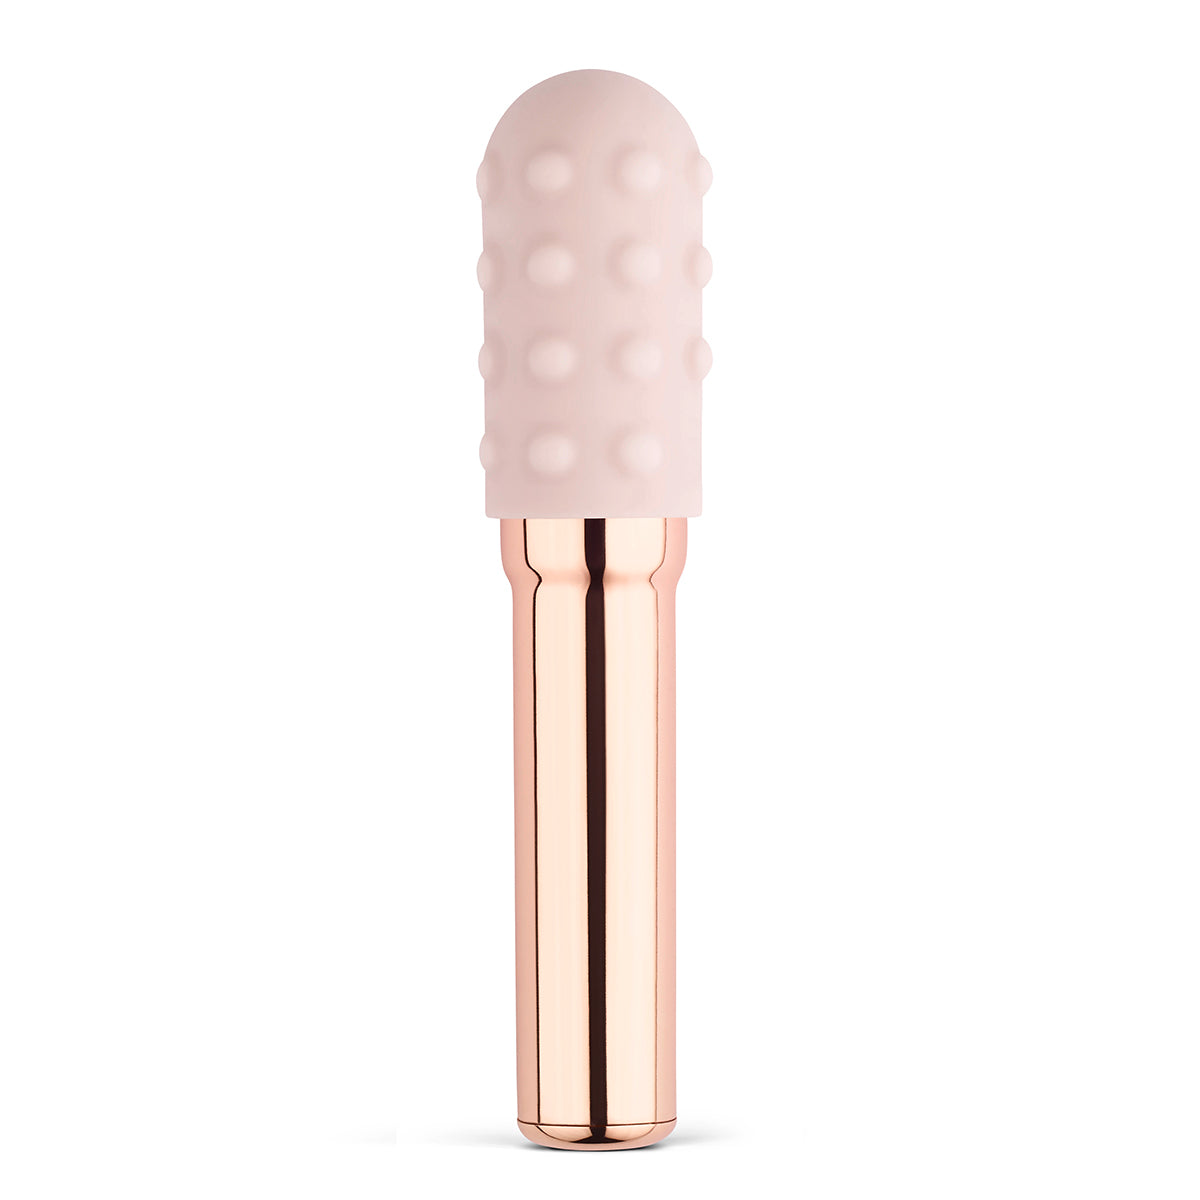 Le Wand Chrome Grand Bullet Rose Gold